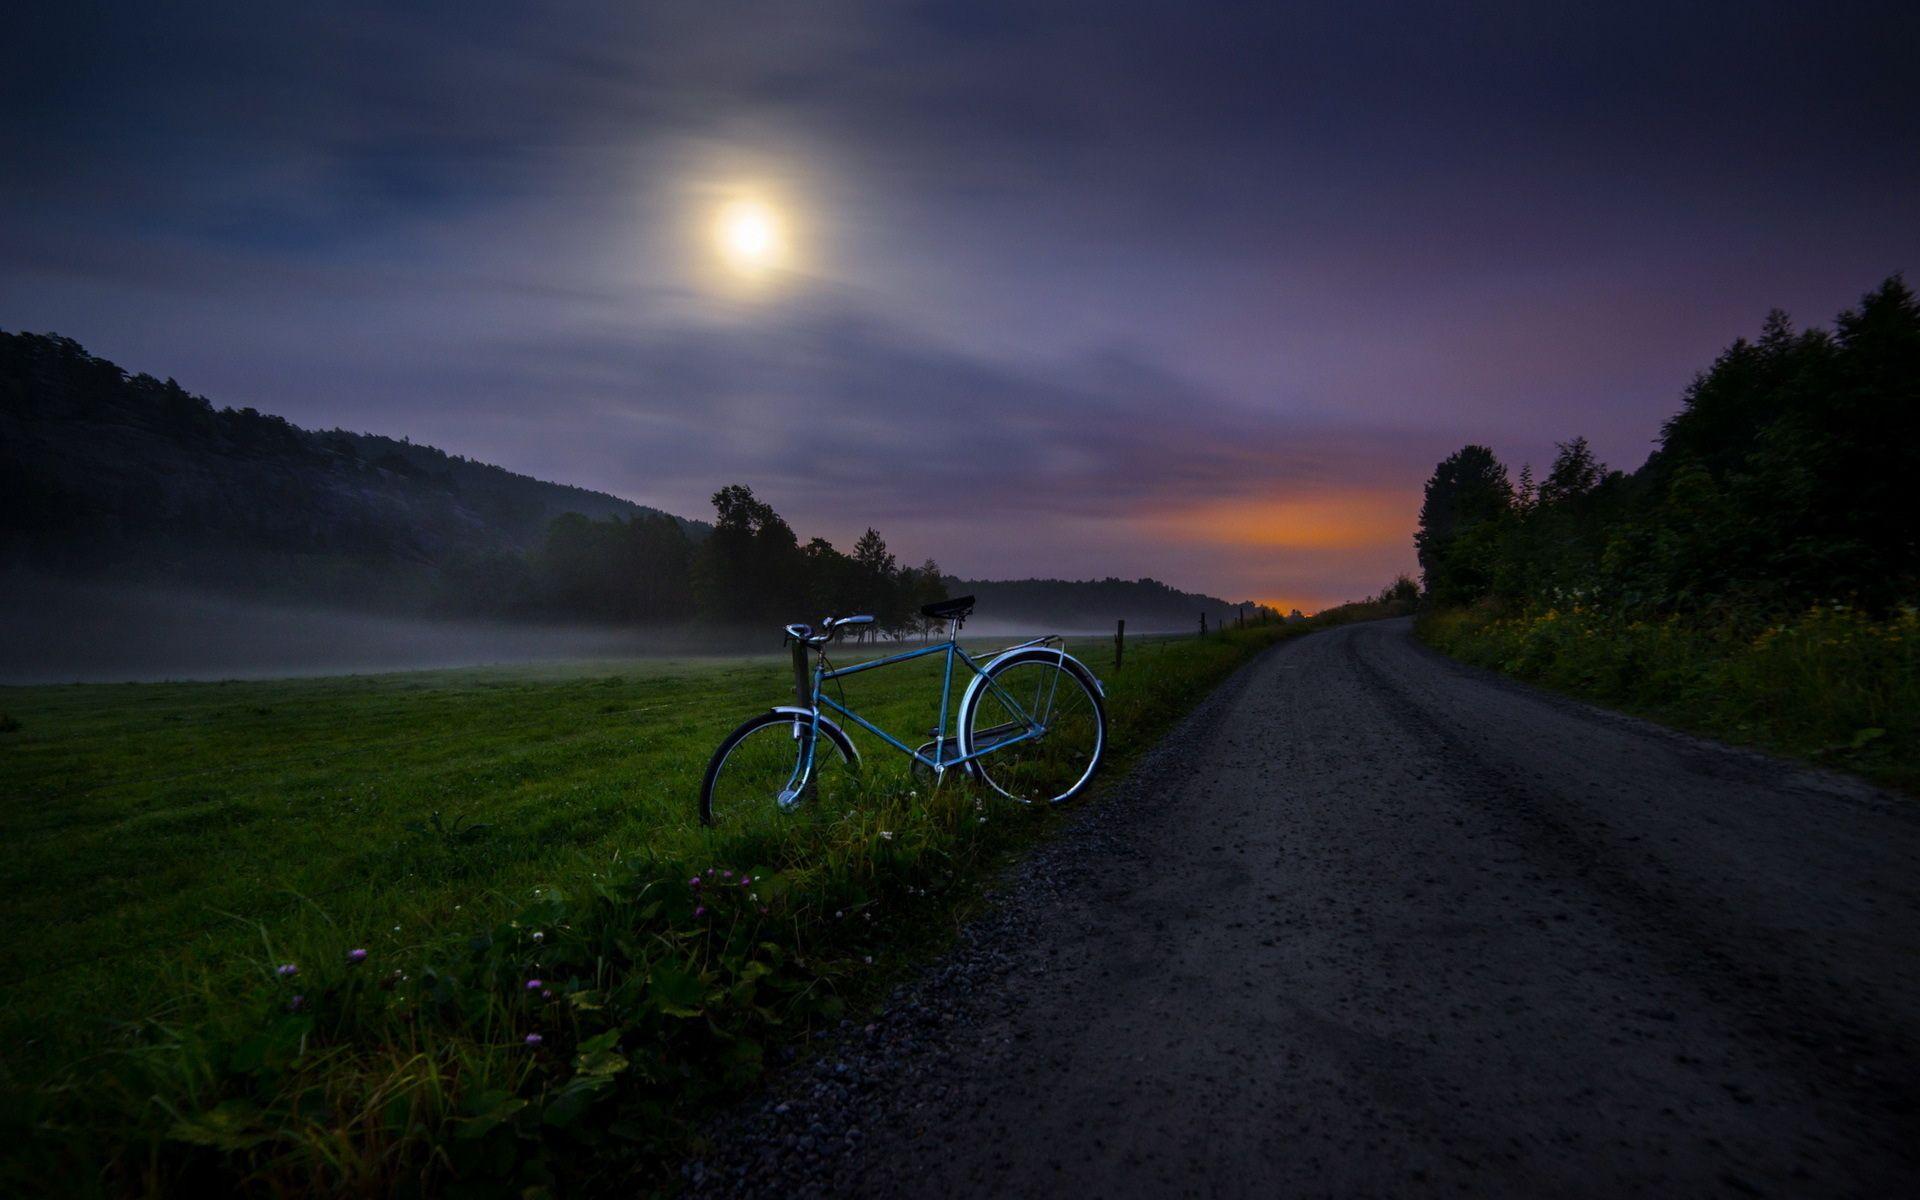 Bike, country road, night, clouds and fog wallpaper download